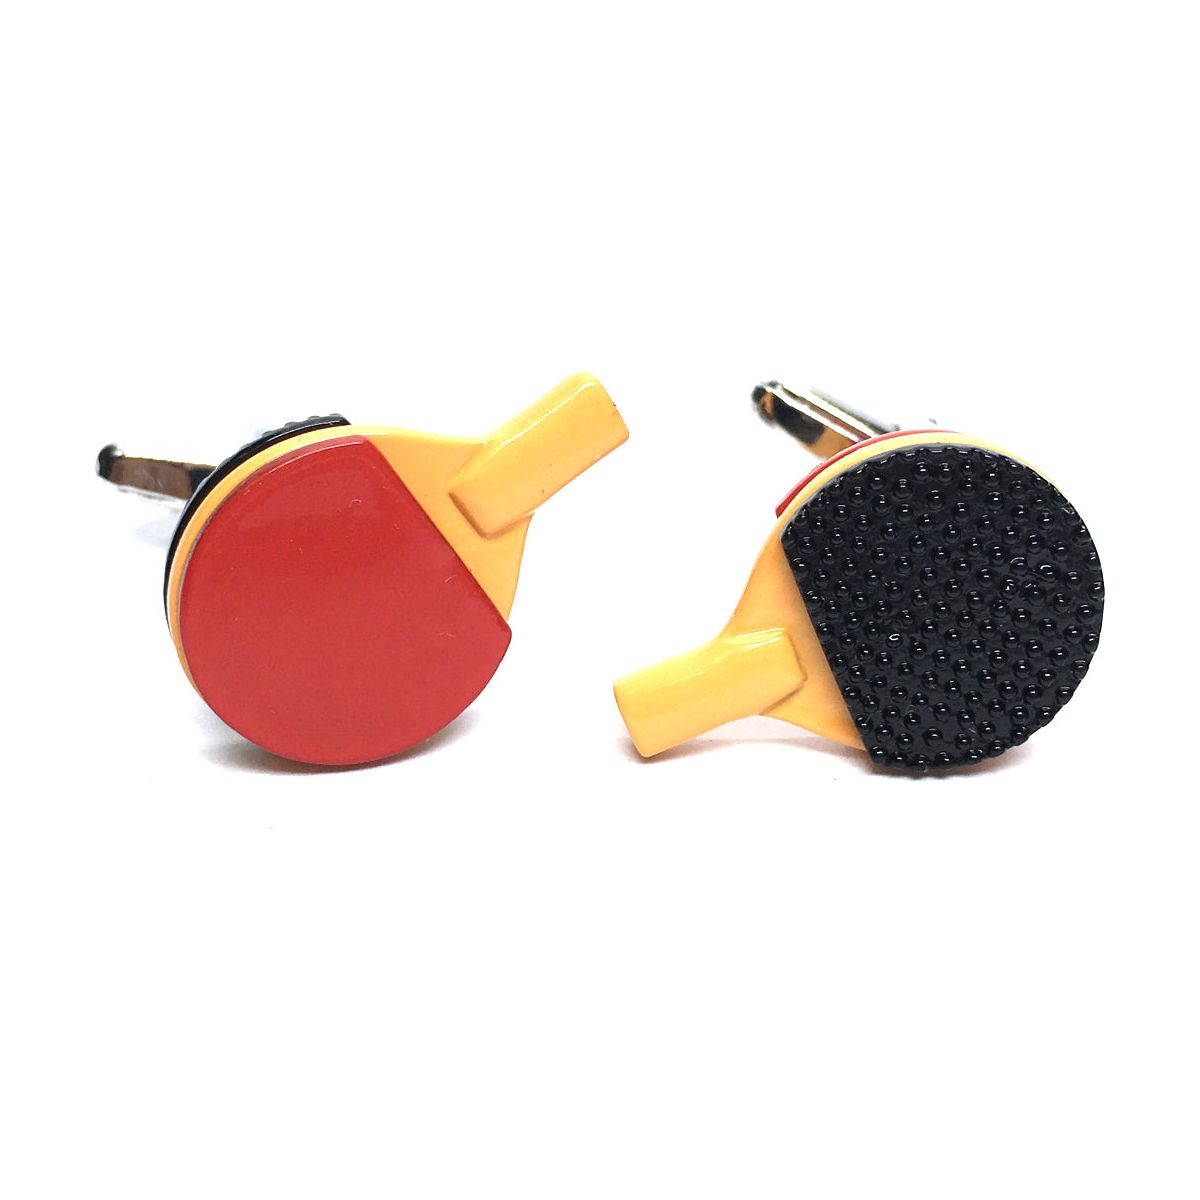 Red & Black Ping Pong Table Tennis Bats Design Cufflinks - Ashton and Finch